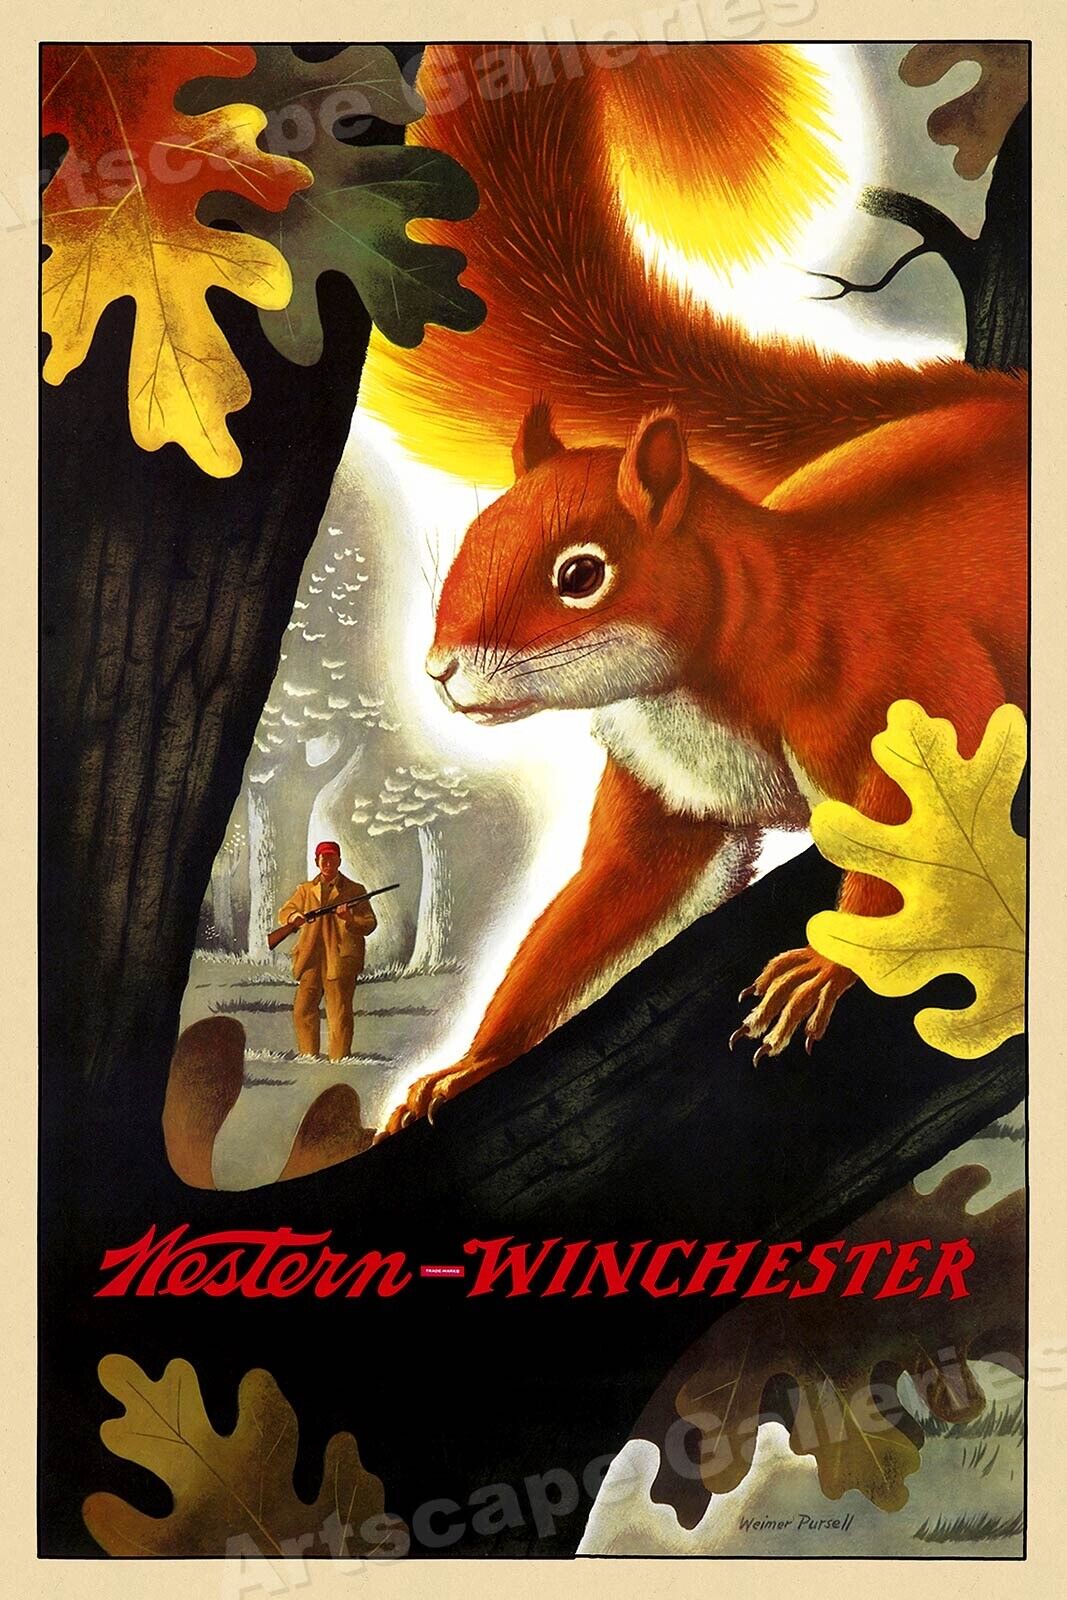 1955 Western Winchester Squirrel Hunting Vintage Style Poster - 16x24